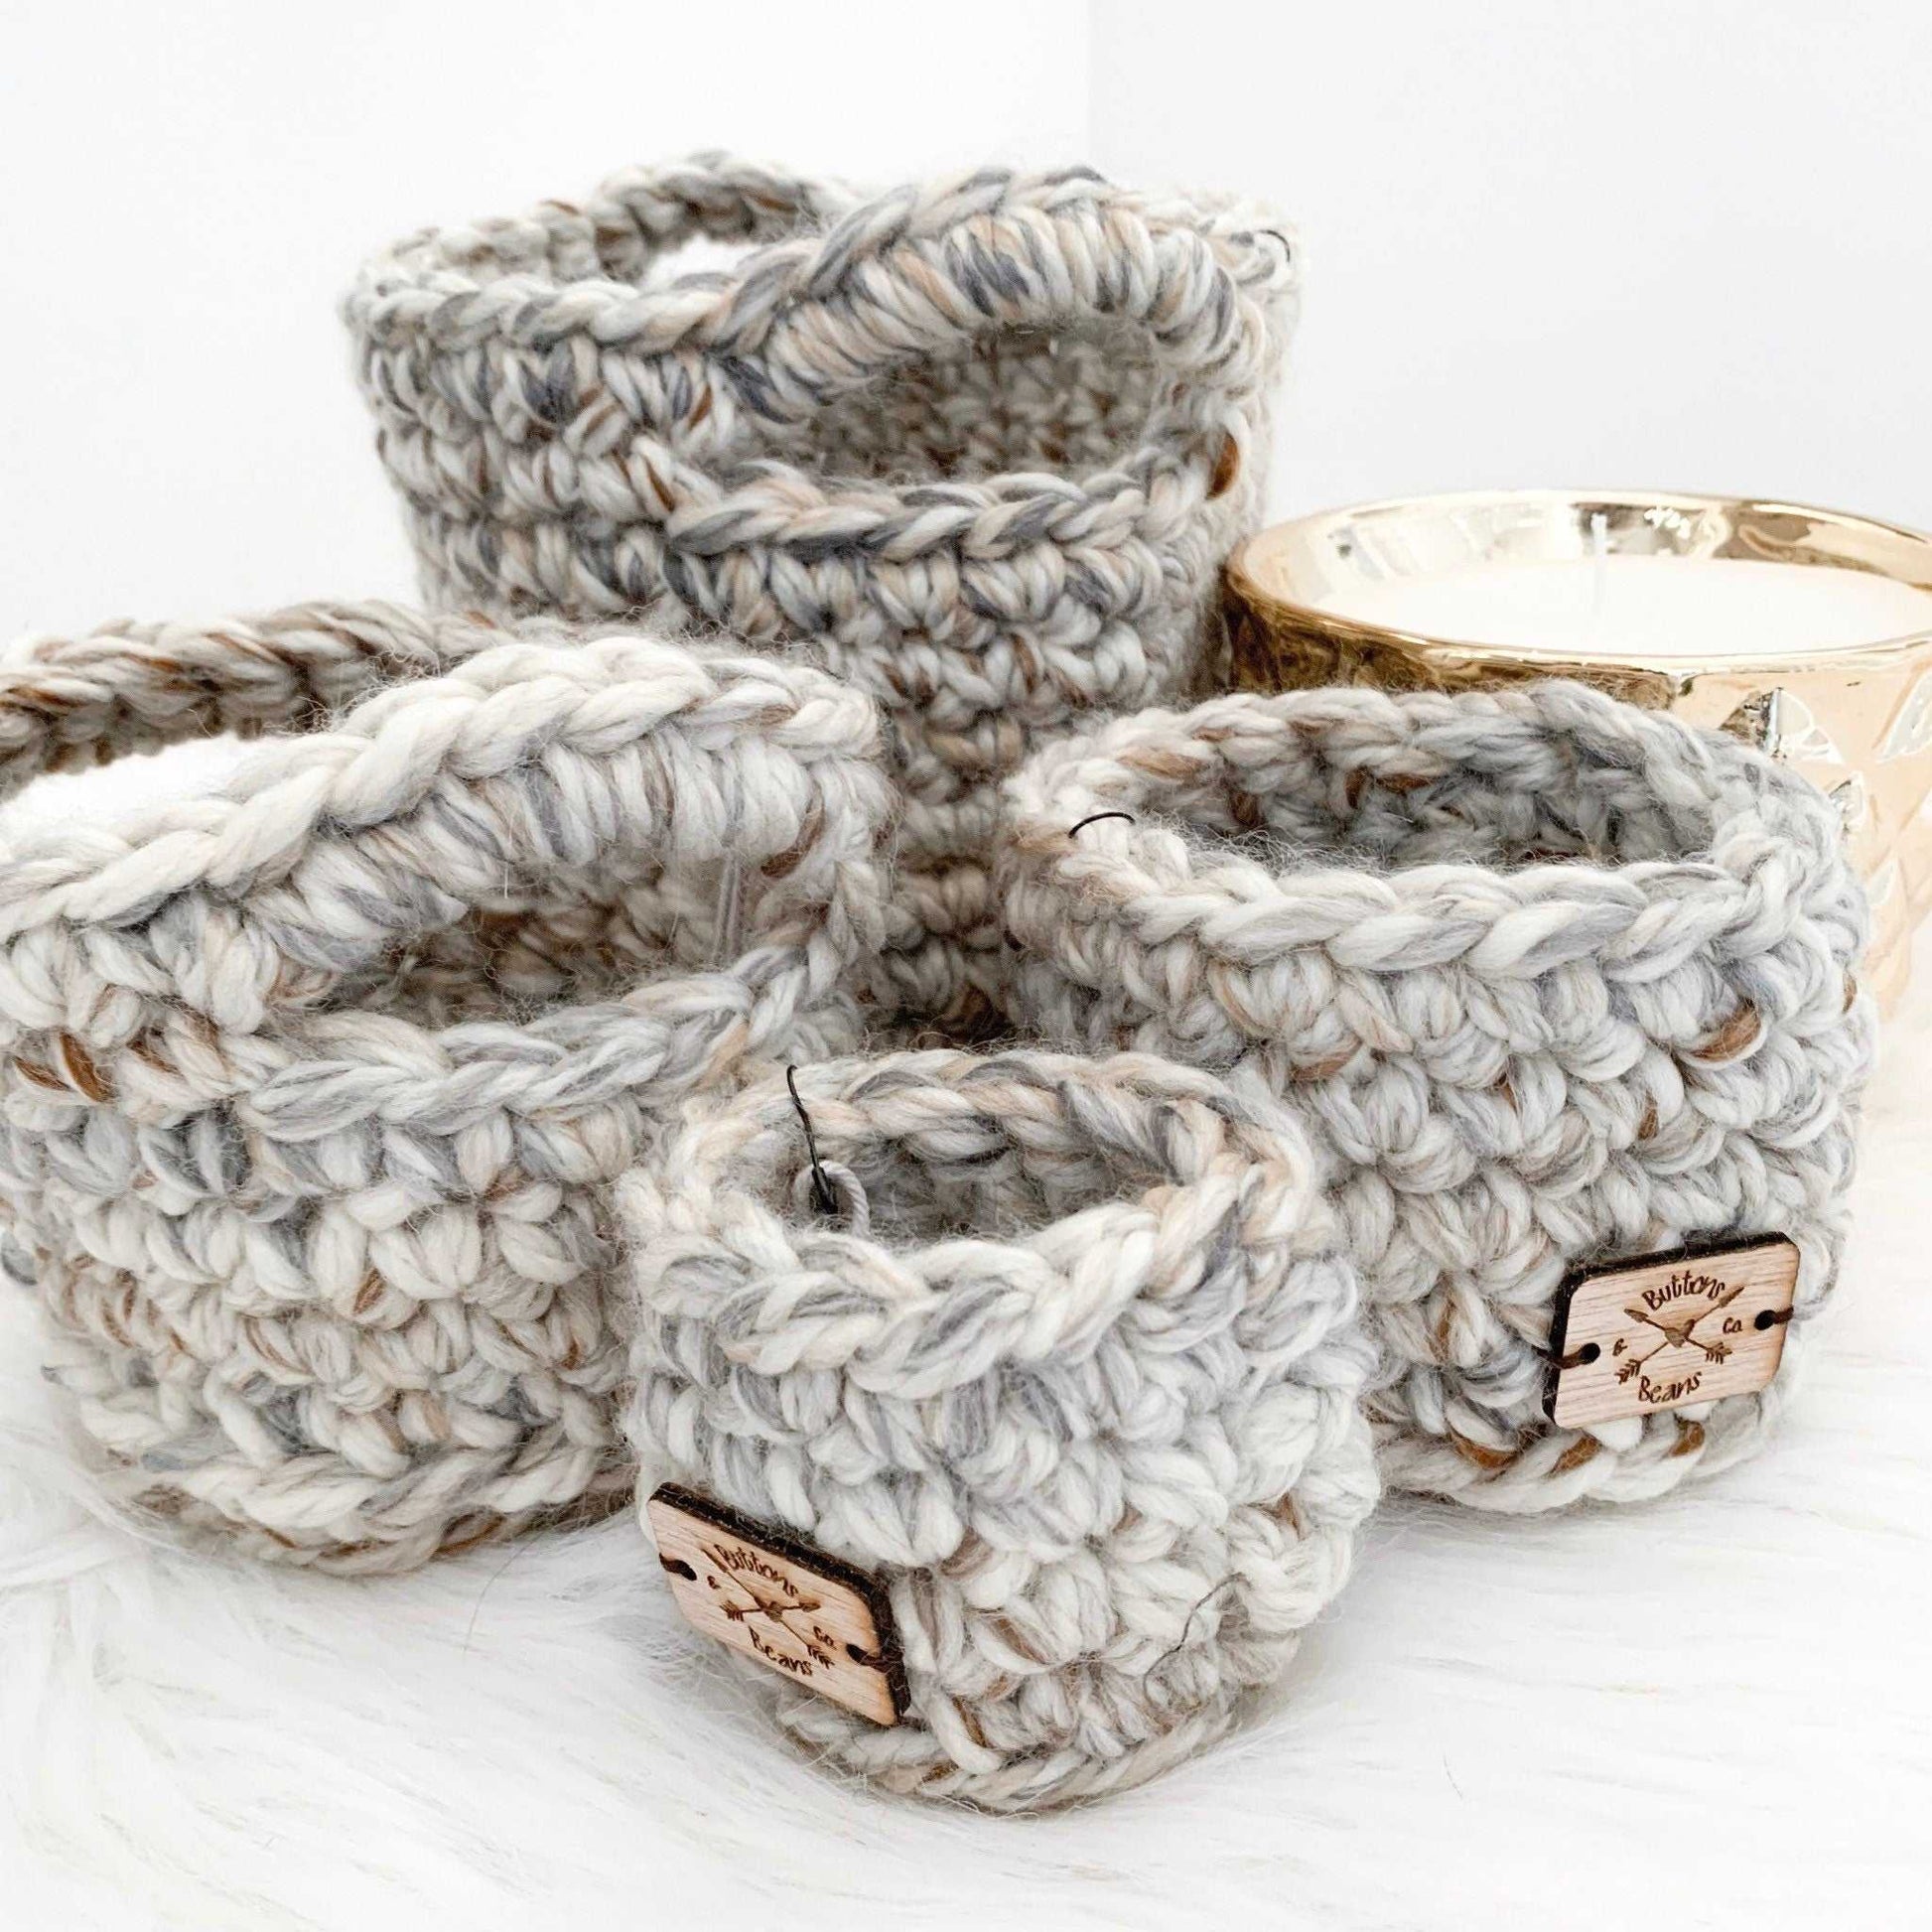 Crochet Basket | Marble Charcoal and White | Storage Decor Home decor 11 $ Buttons & Beans Co.